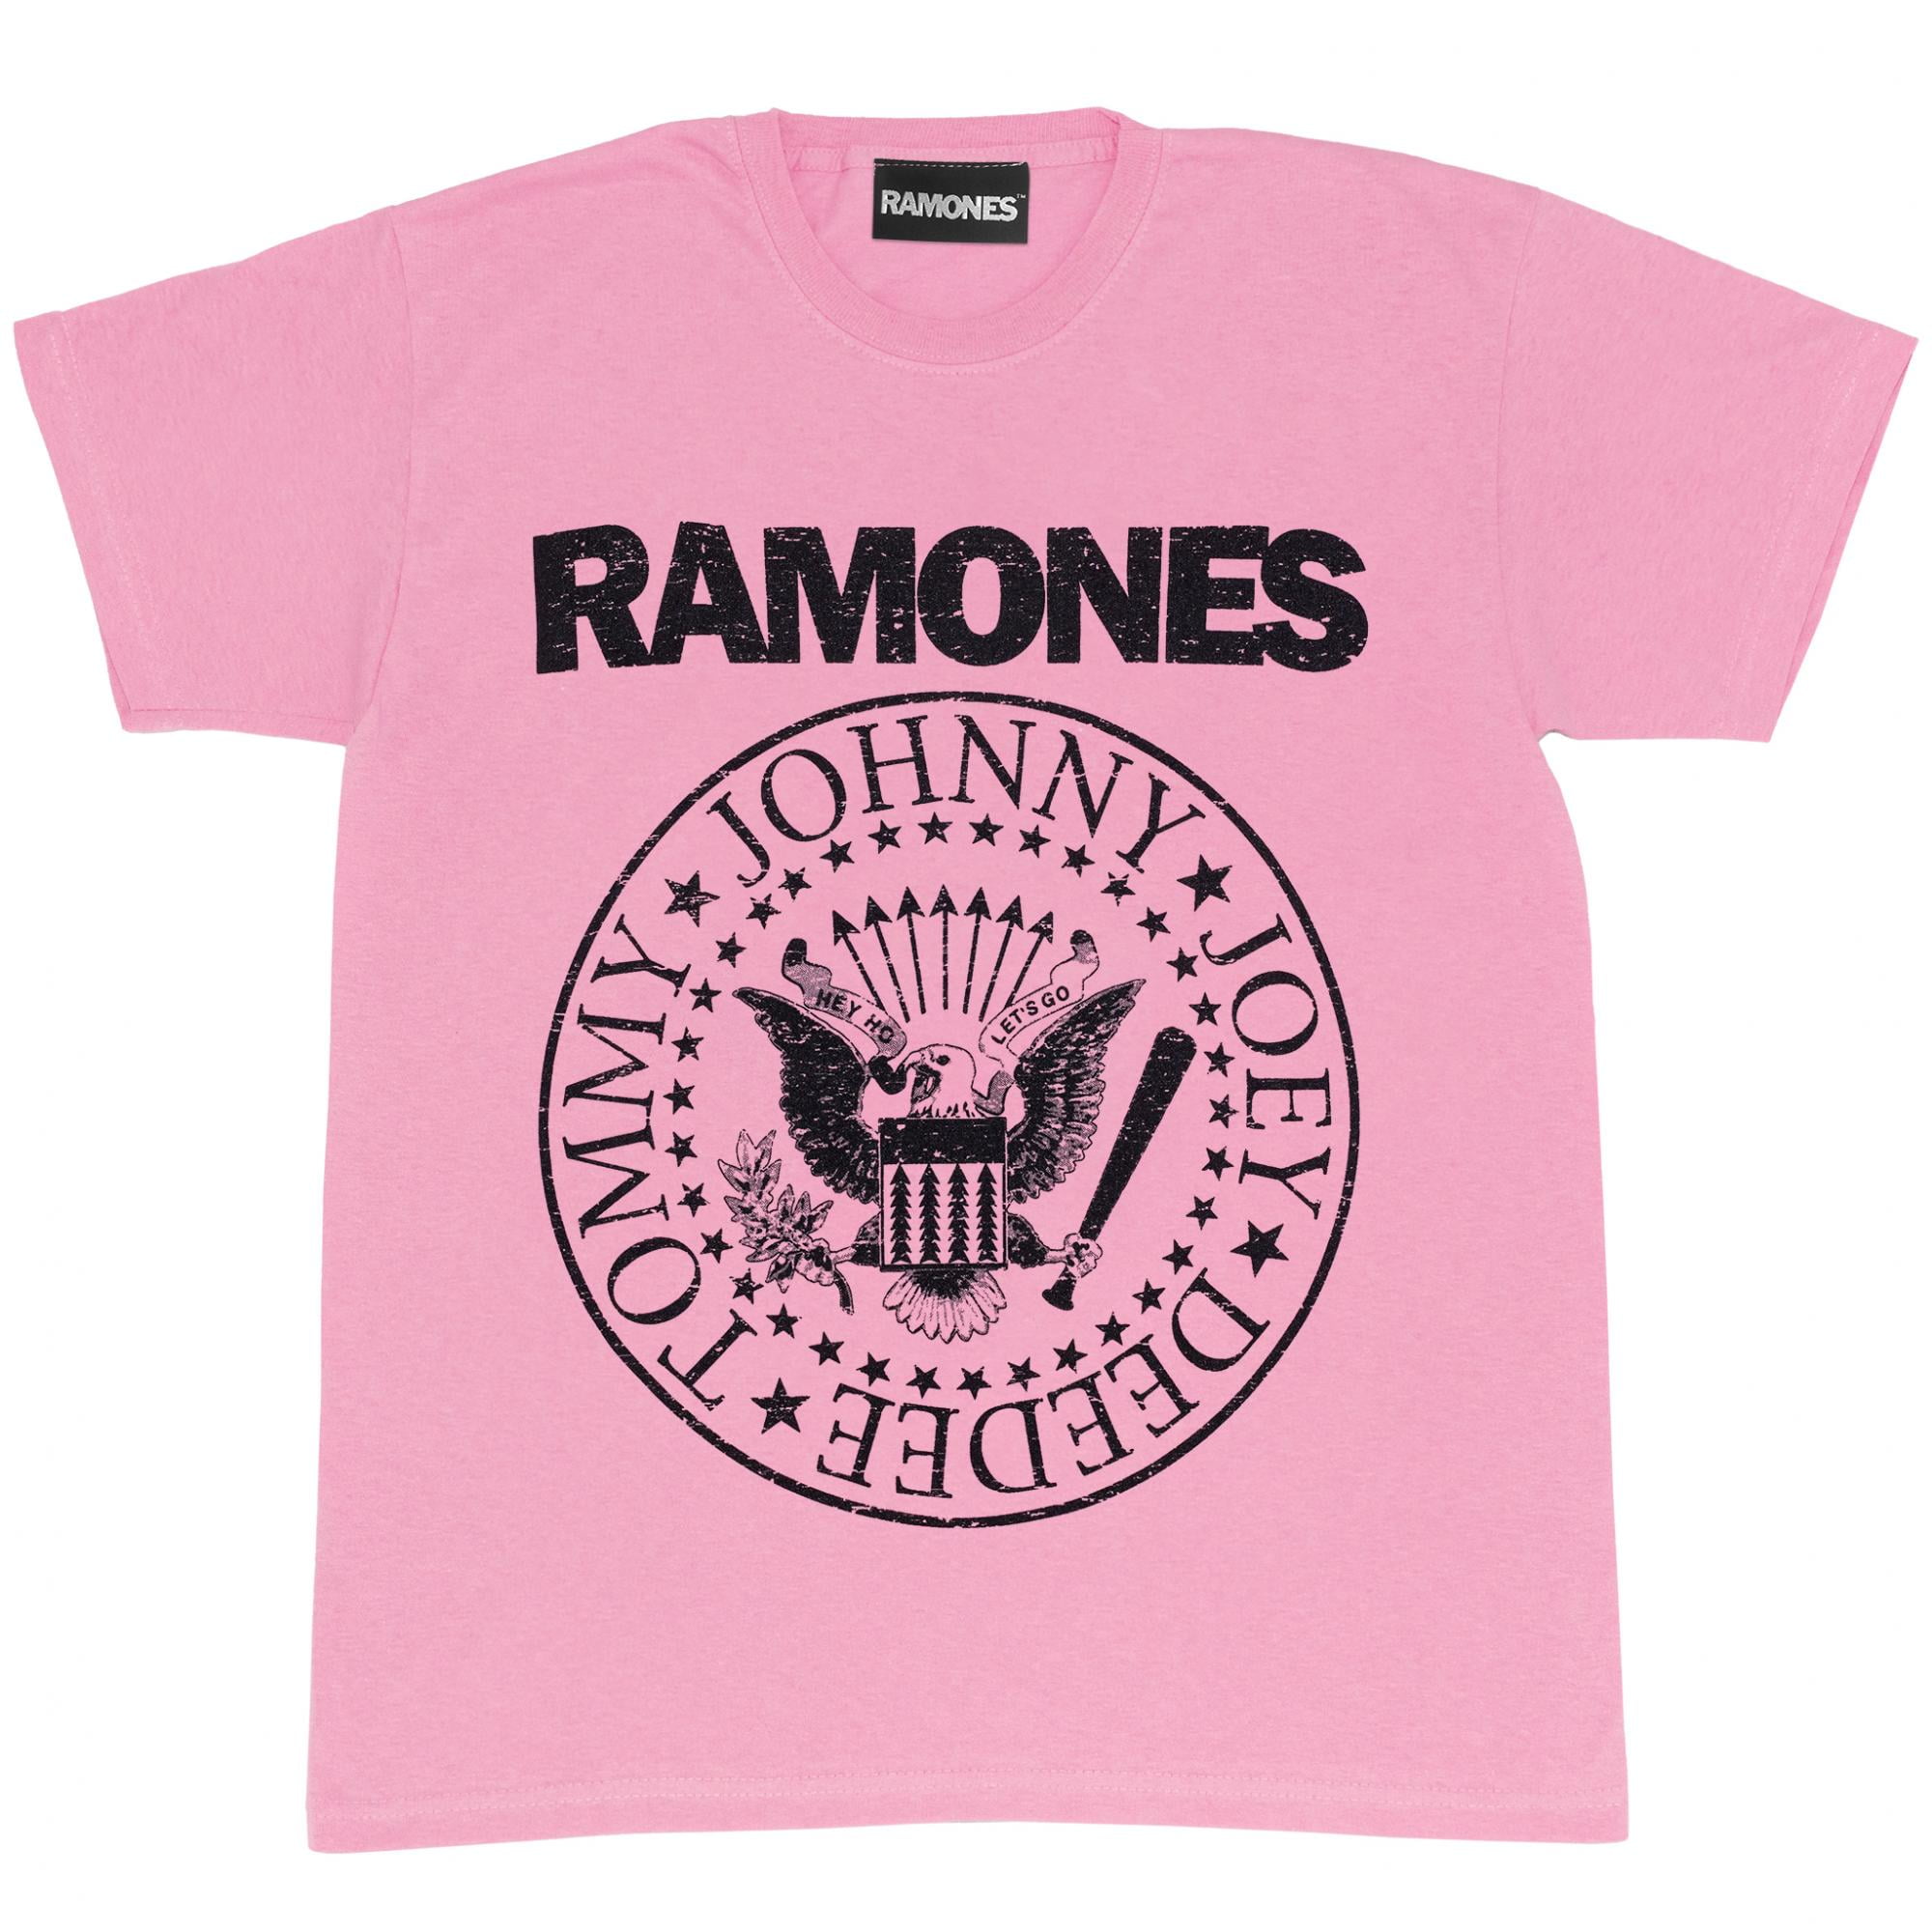 Brand New in Packaging Kids Childrens Ramones Long Sleeved T Shirt Blue Age 8-9 